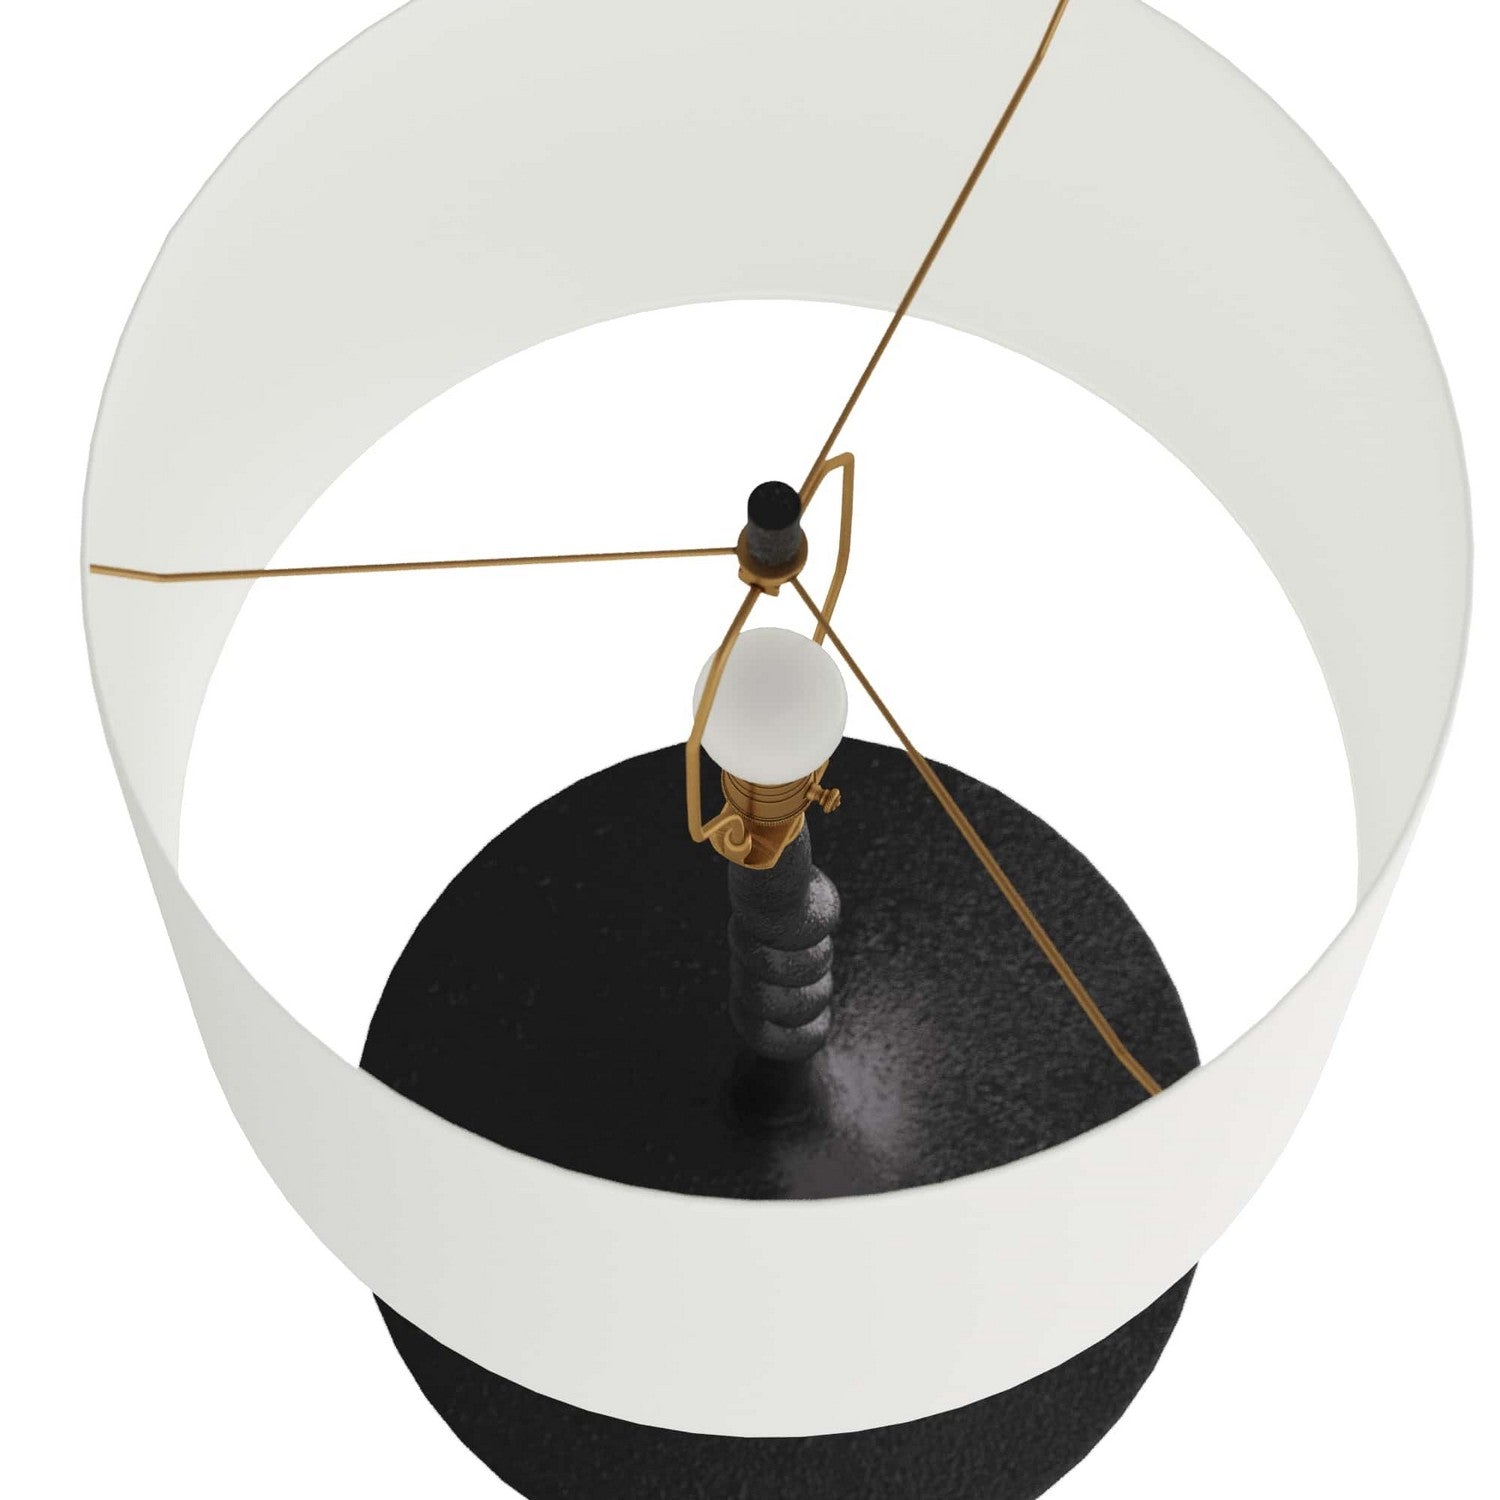 One Light Table Lamp from the Shepherd's collection in Blackened Bronze finish